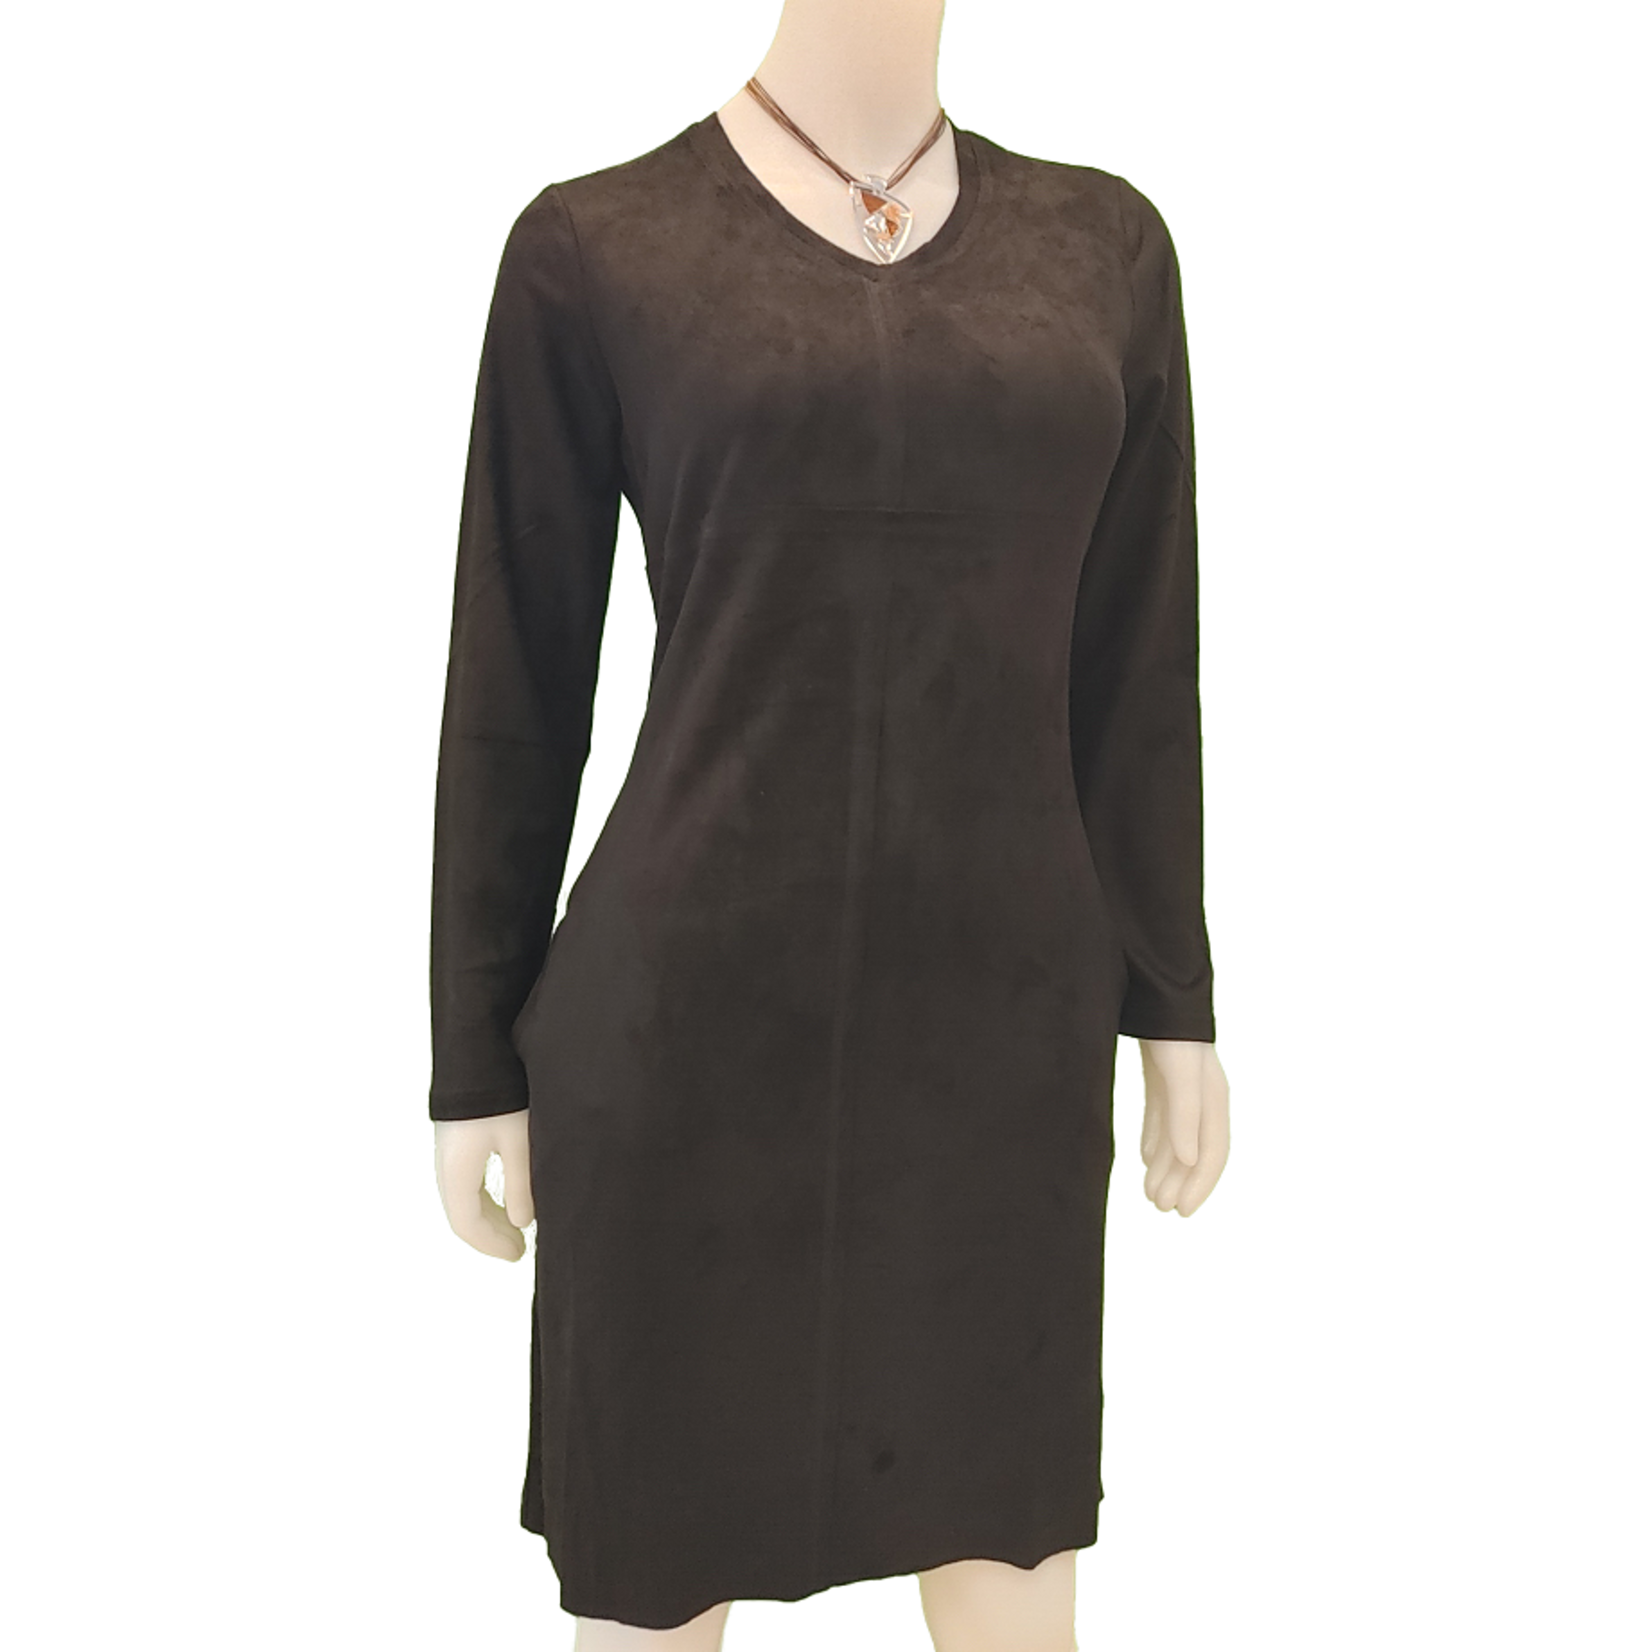 bolide Bolide ladies long sleeve v-neck faux suede woven dress